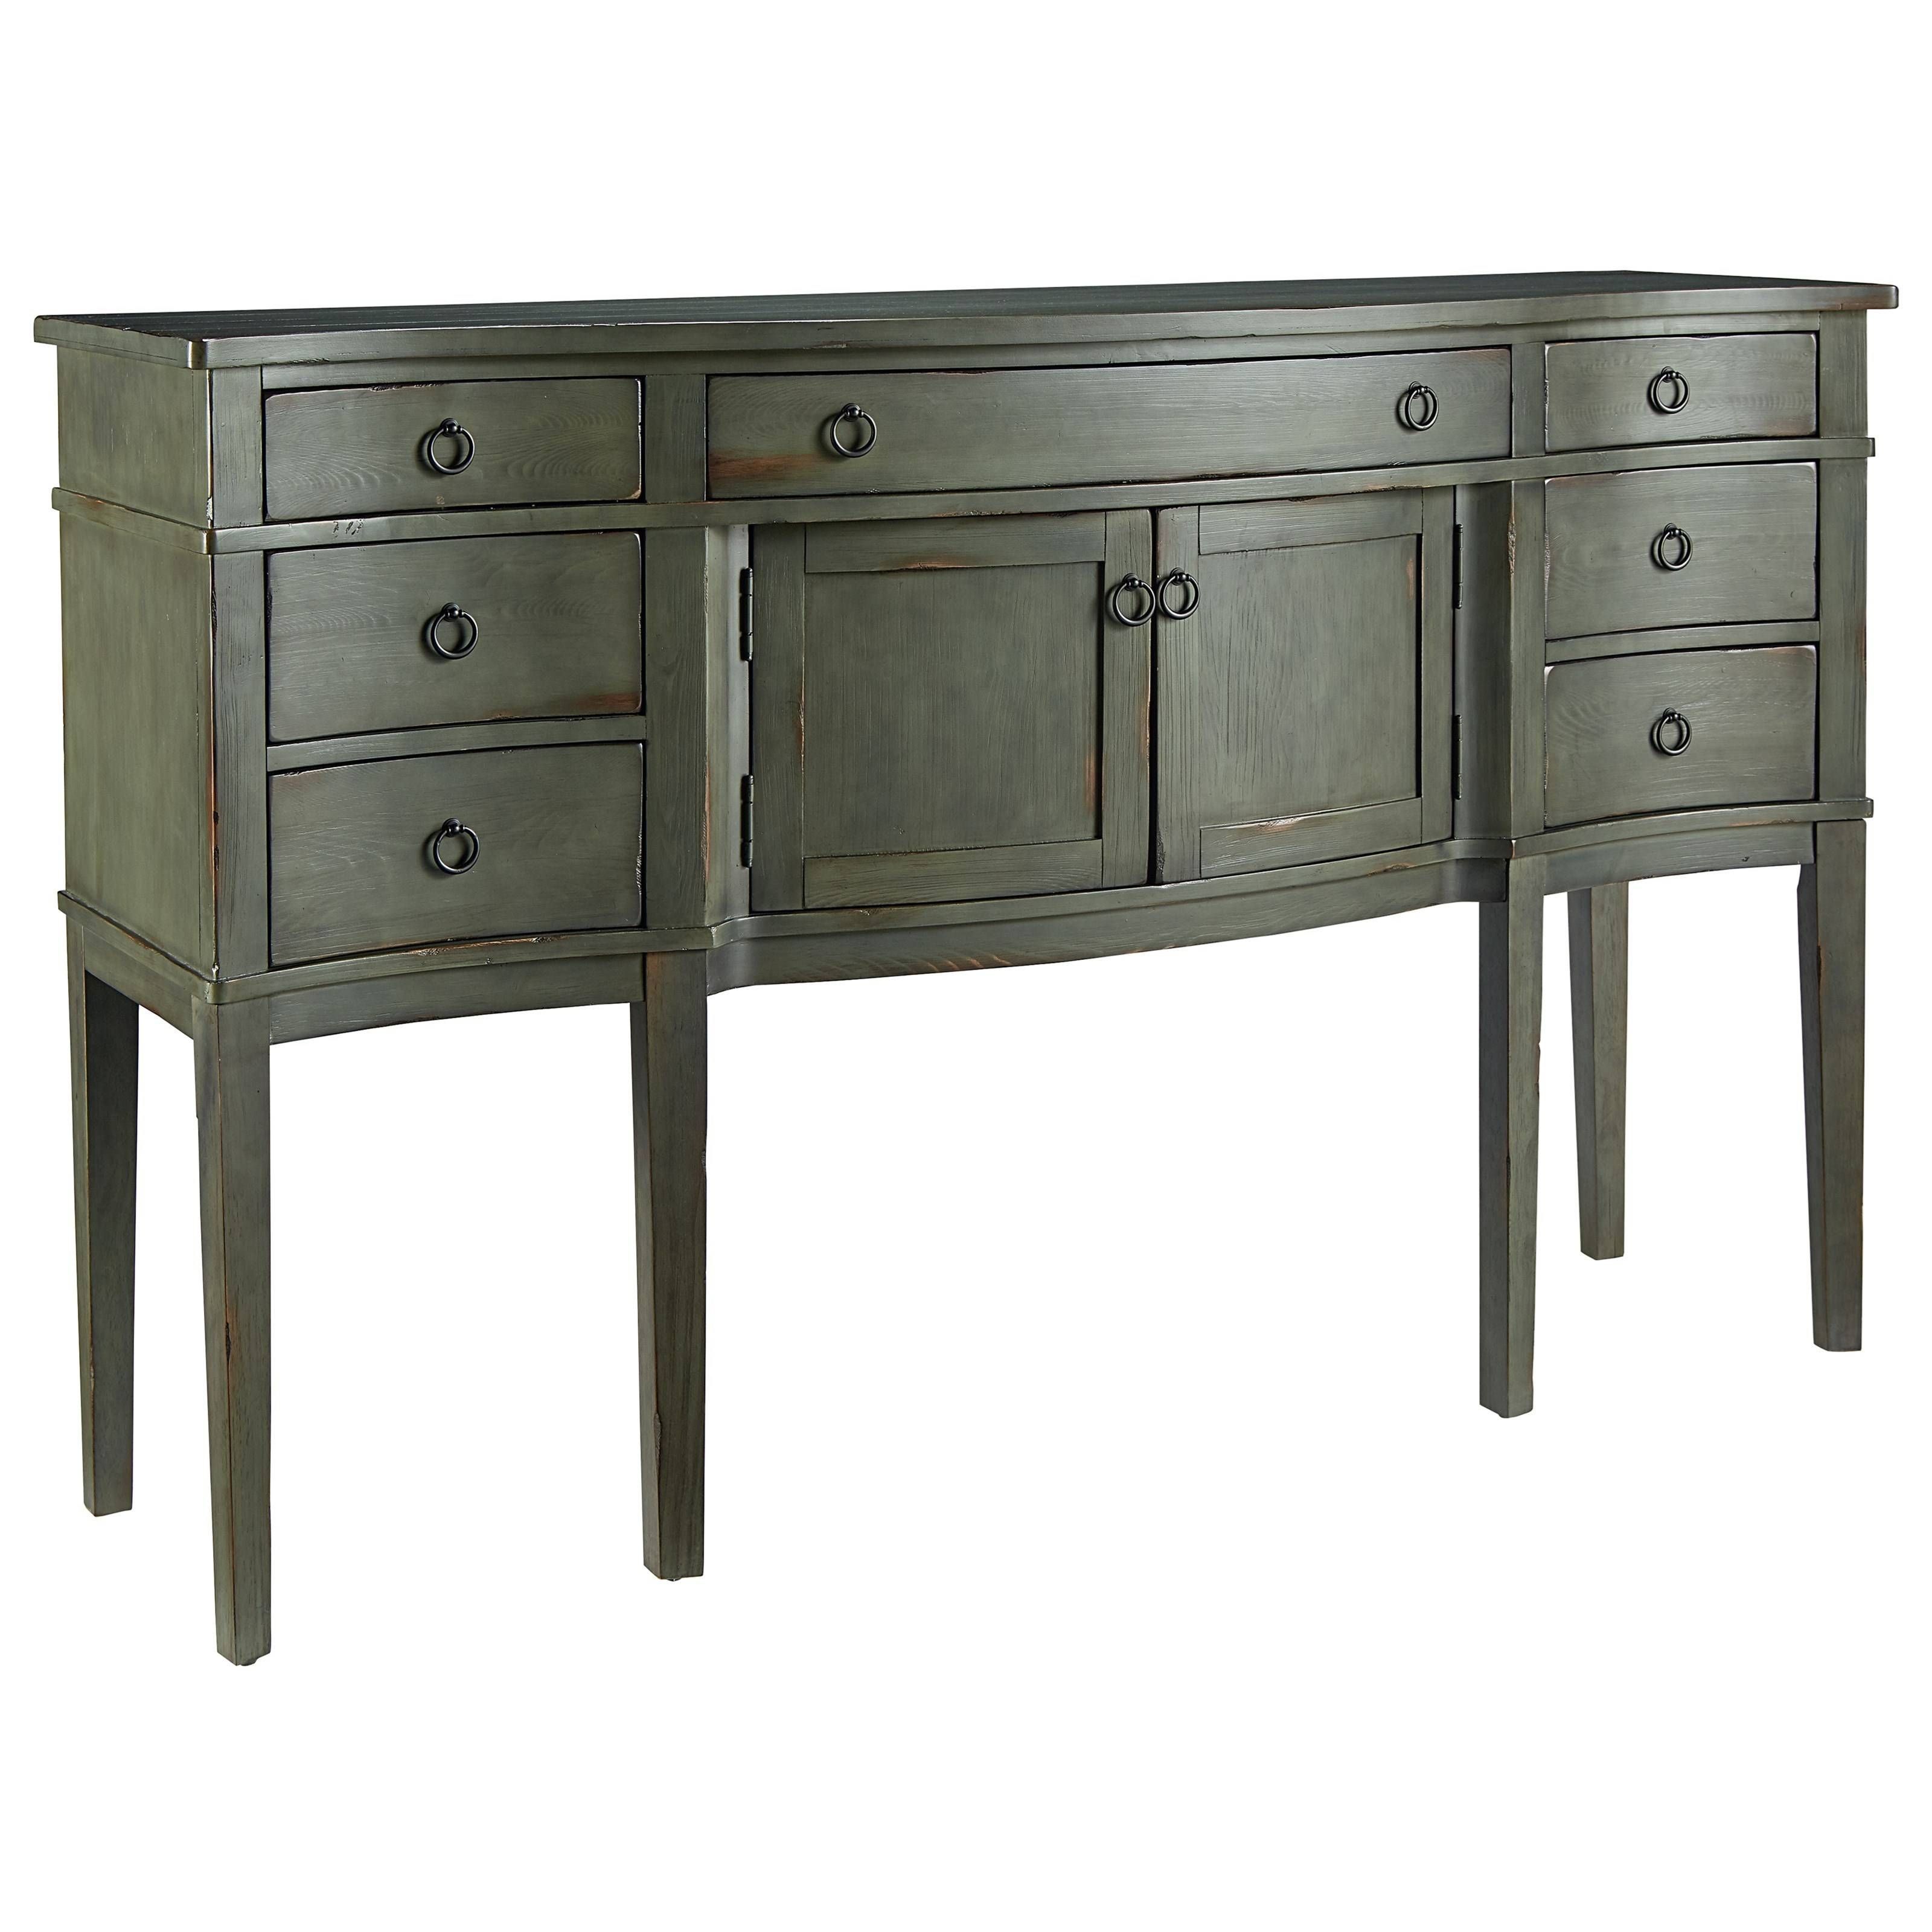 Beautiful Sideboards And Servers – Bjdgjy For Most Current Sideboards And Servers (View 13 of 15)